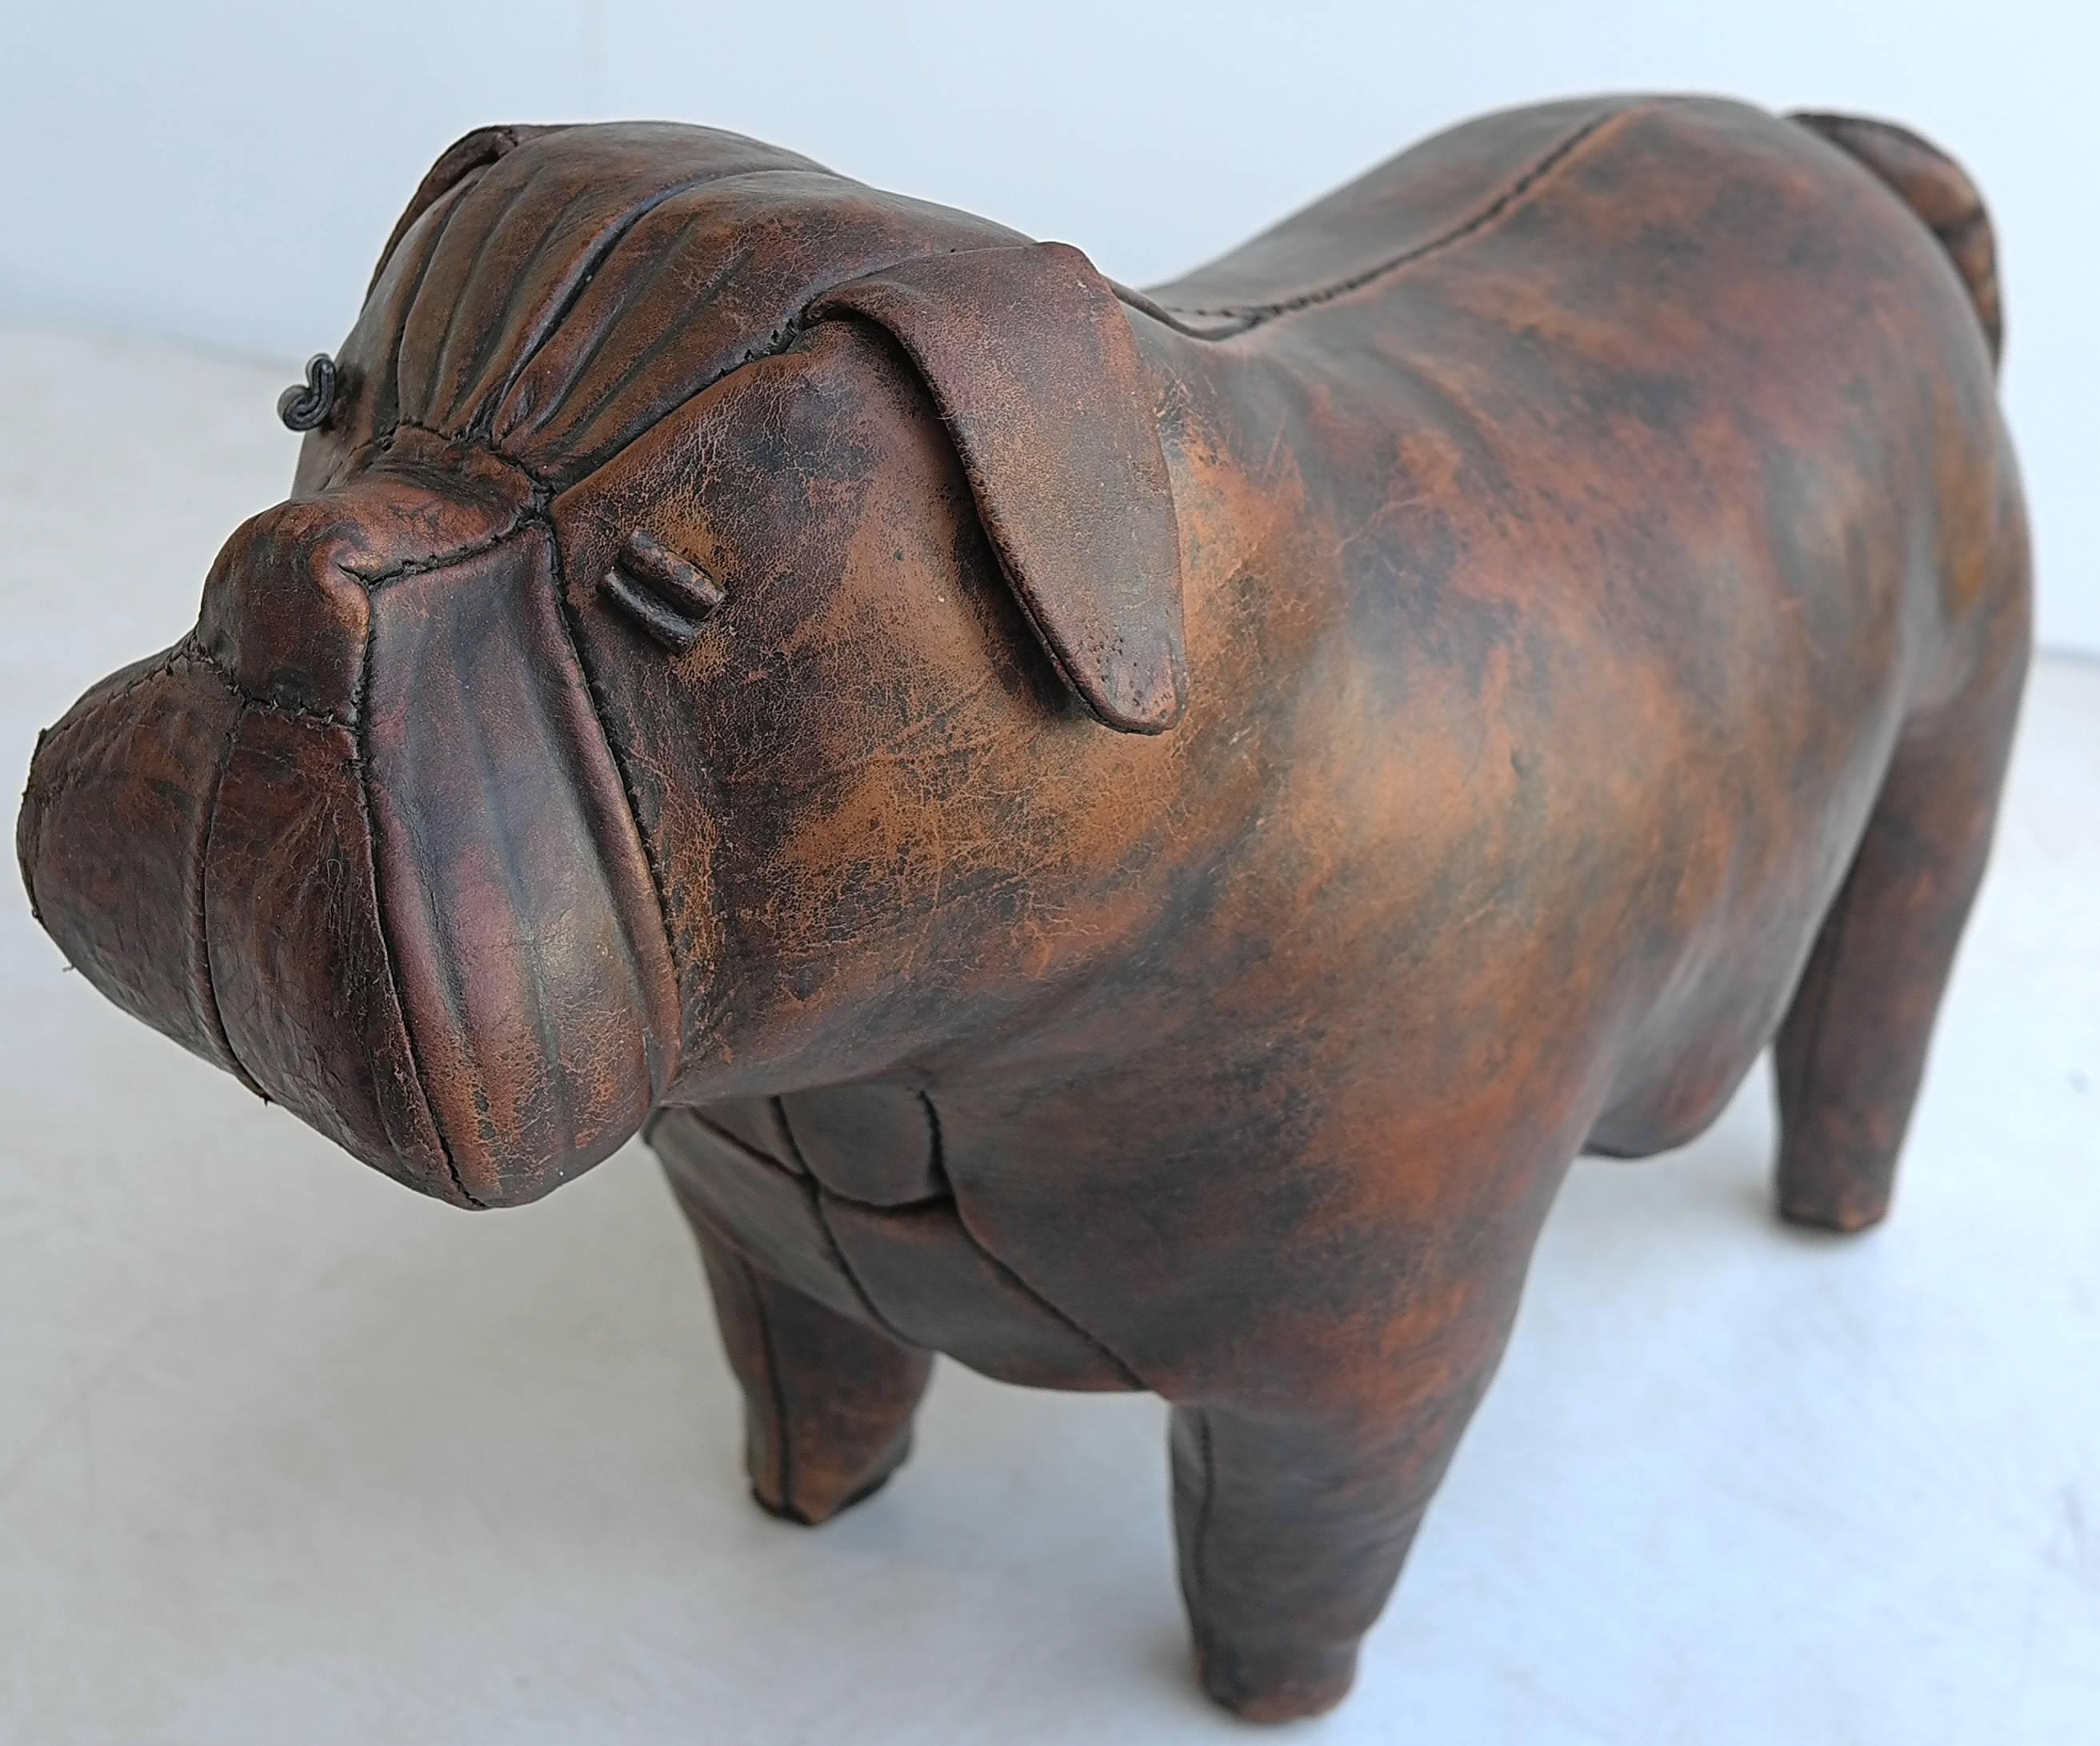 Leather bulldog by Dimitri Omersa for Abercrombie & Fitch. In very good vintage condition with minimal wear of use.